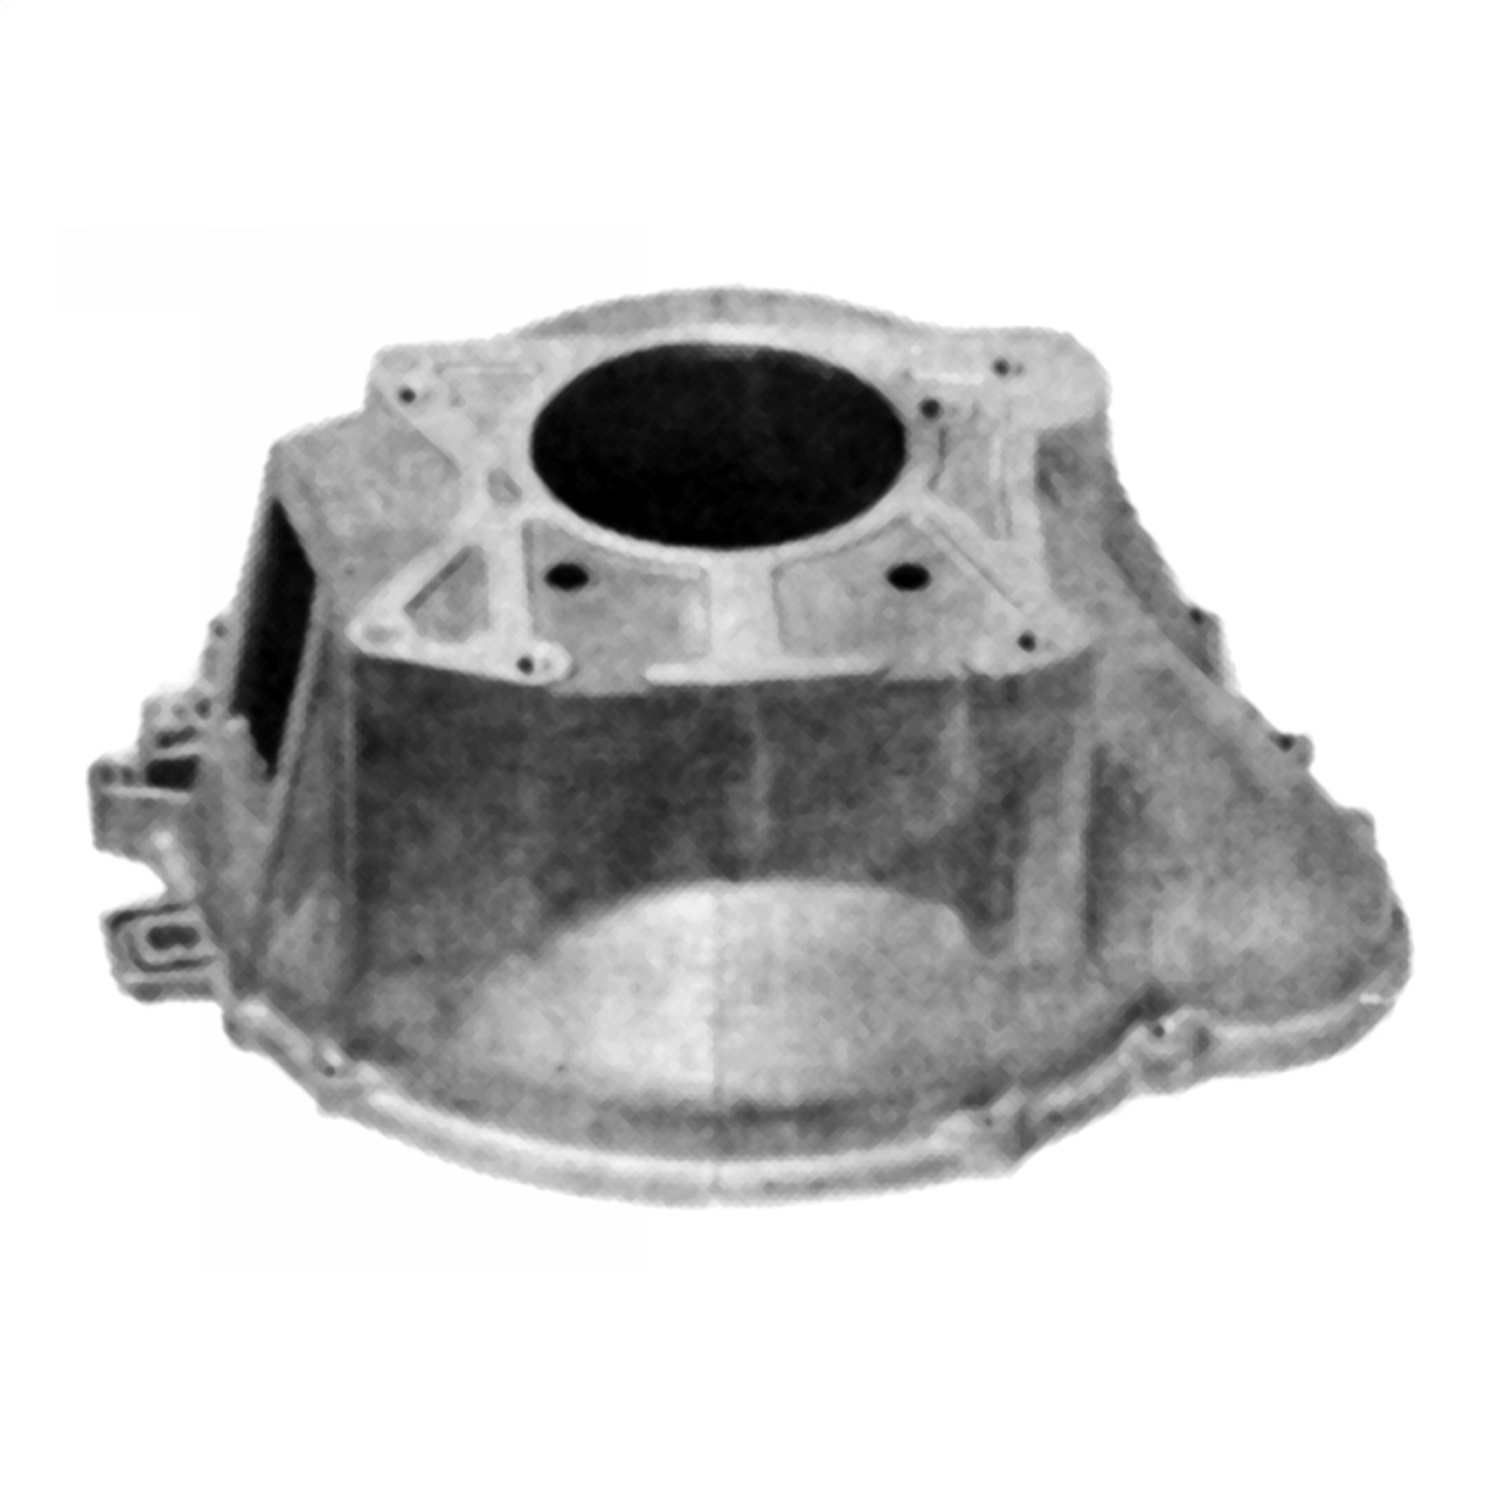 Ford Racing Ford Racing M-6392-R58 Bellhousing Fits 95 Mustang